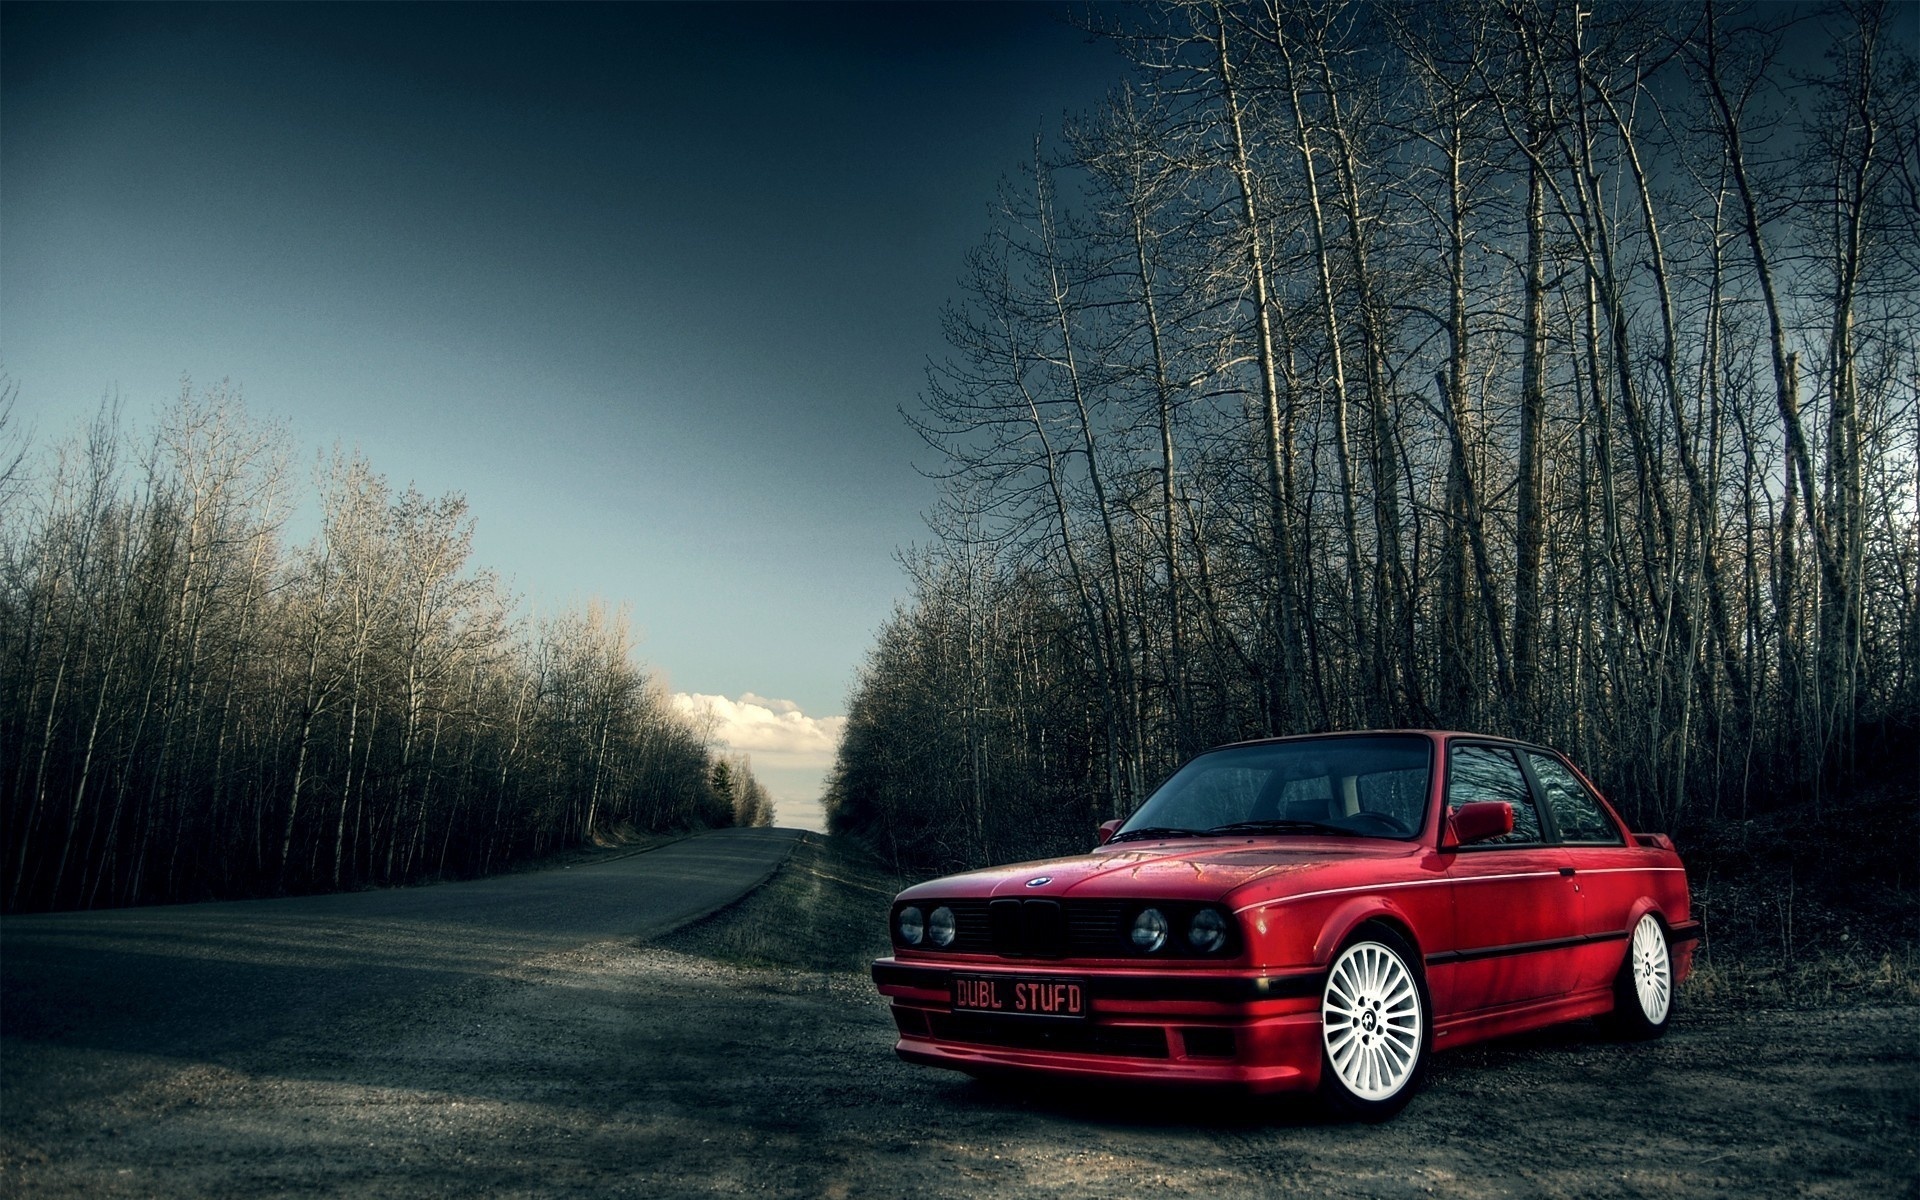 95 Old Bmw Wallpapers On Wallpapersafari Images, Photos, Reviews